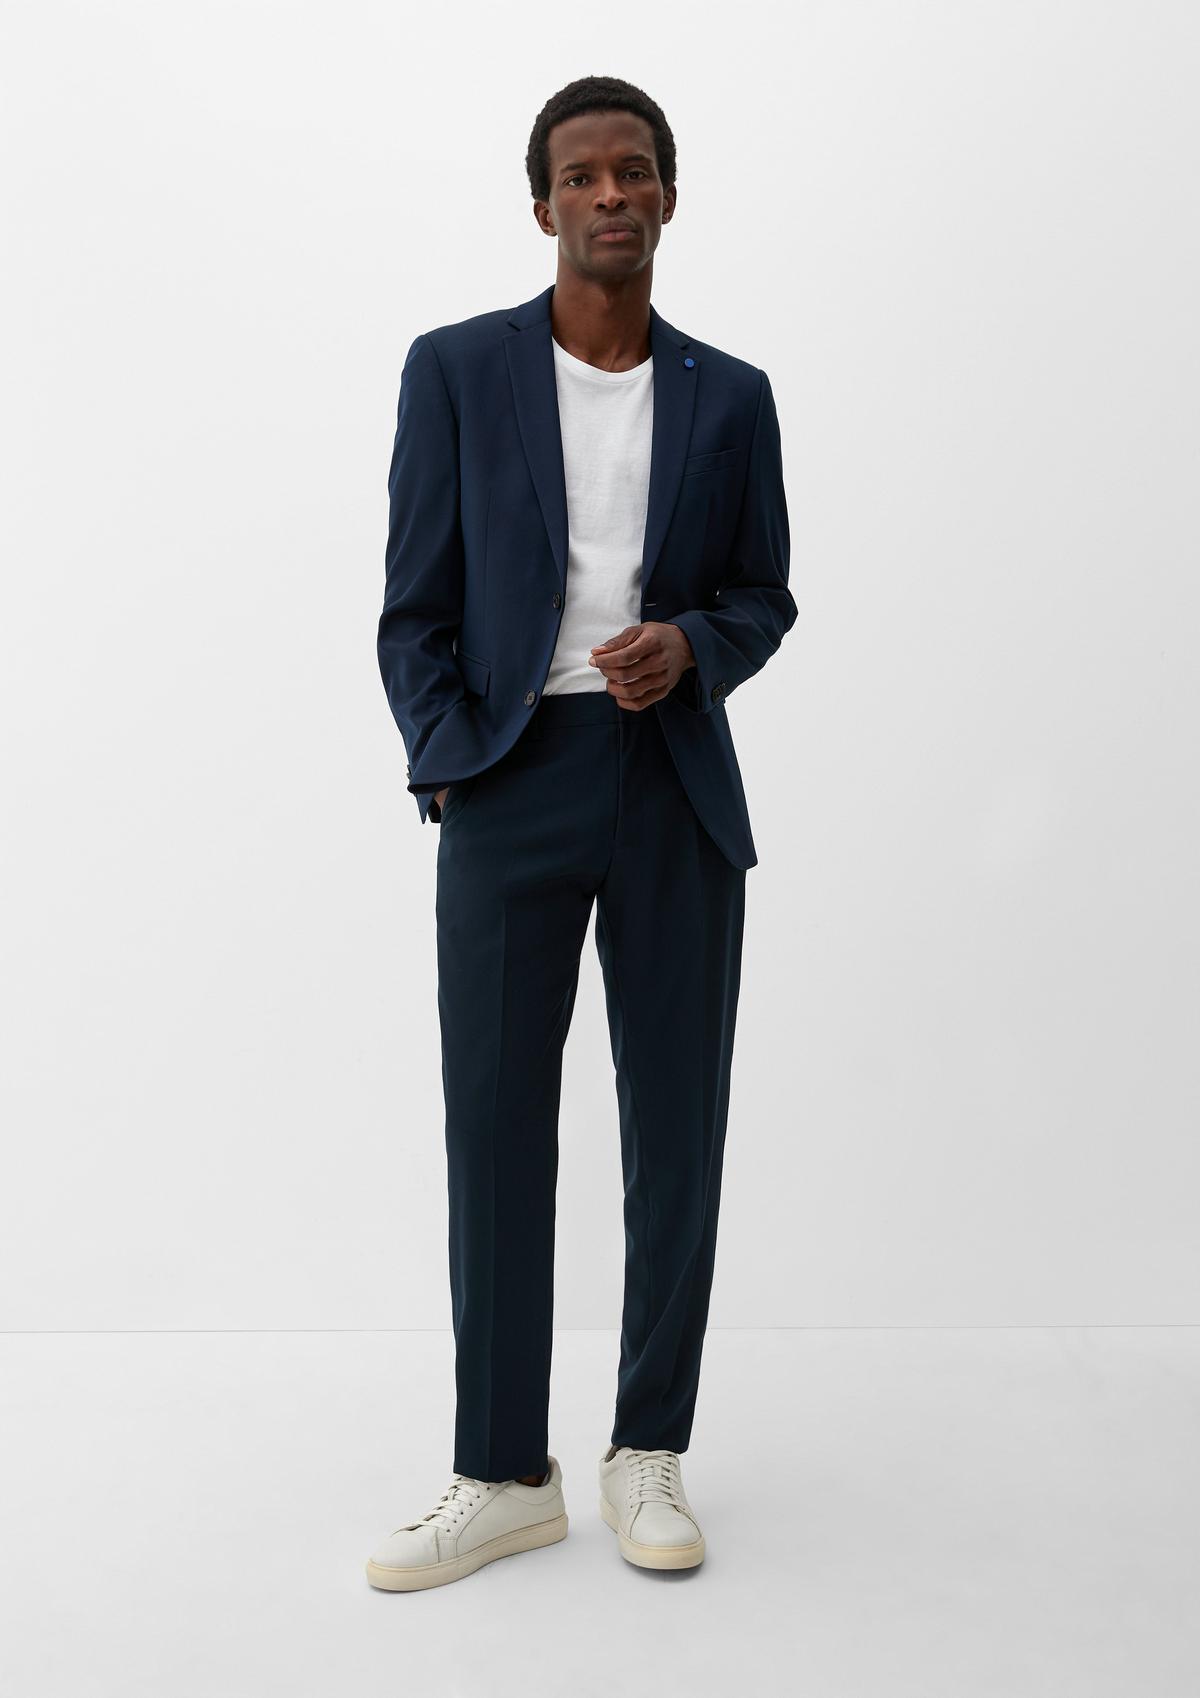 s.Oliver Slim Fit: Suit trousers with stretch for comfort